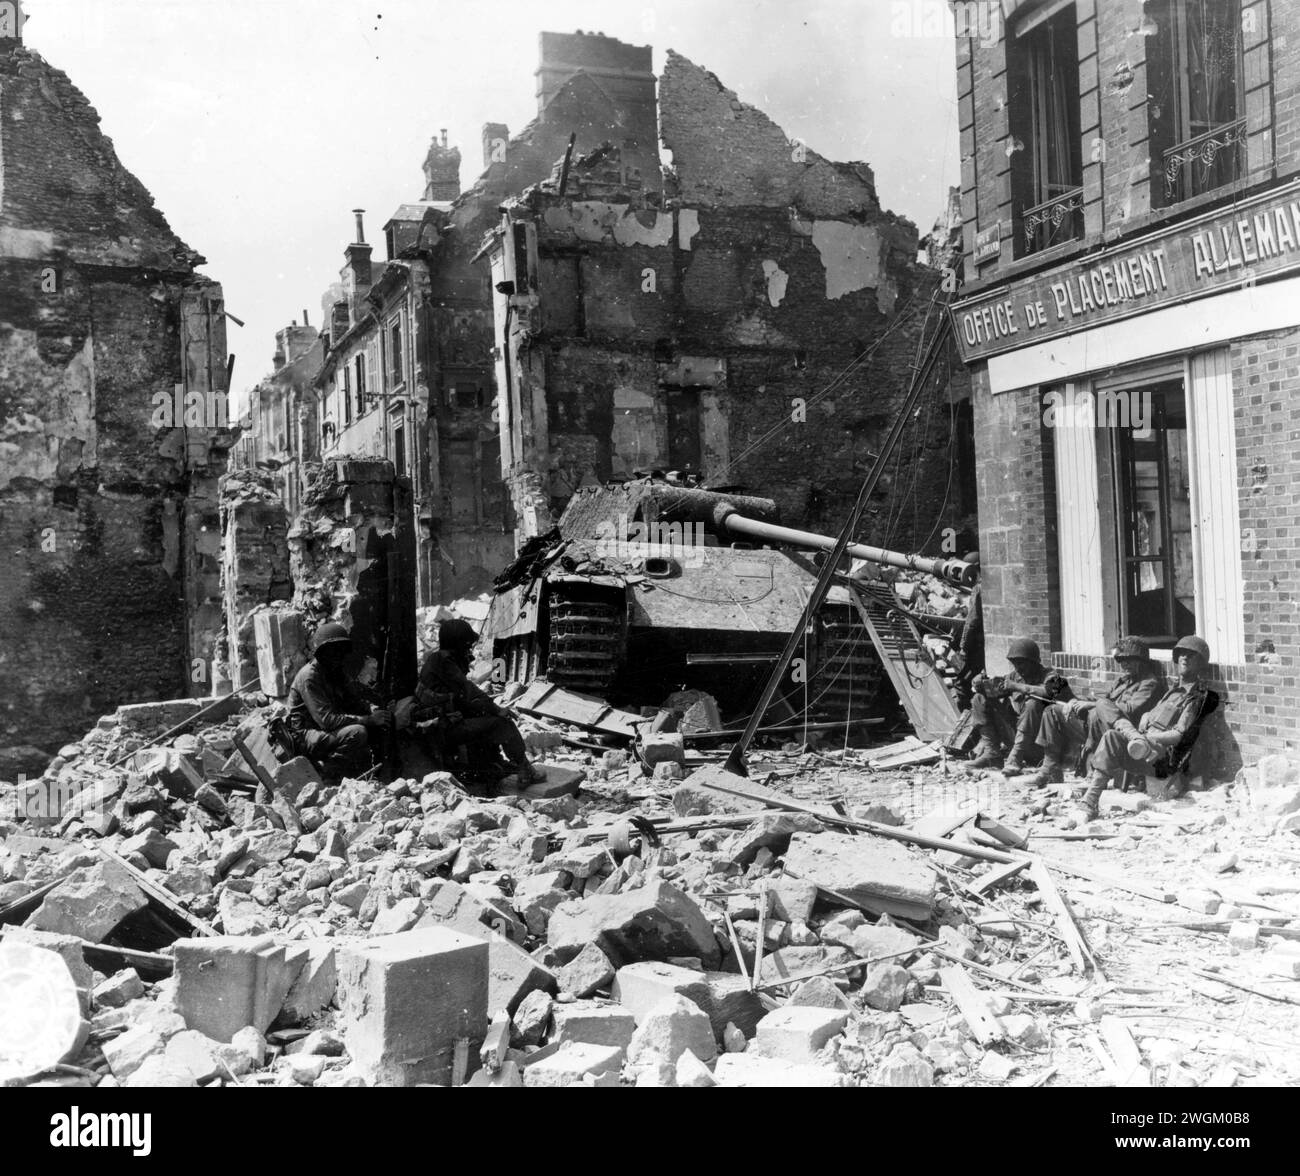 Knocked out Tiger [sic] tank, the last vehicle abandoned by the Germans in their flight from Argentan, France, in the face of terrific American assault which liberated the town. 20 August, 1944. Stock Photo